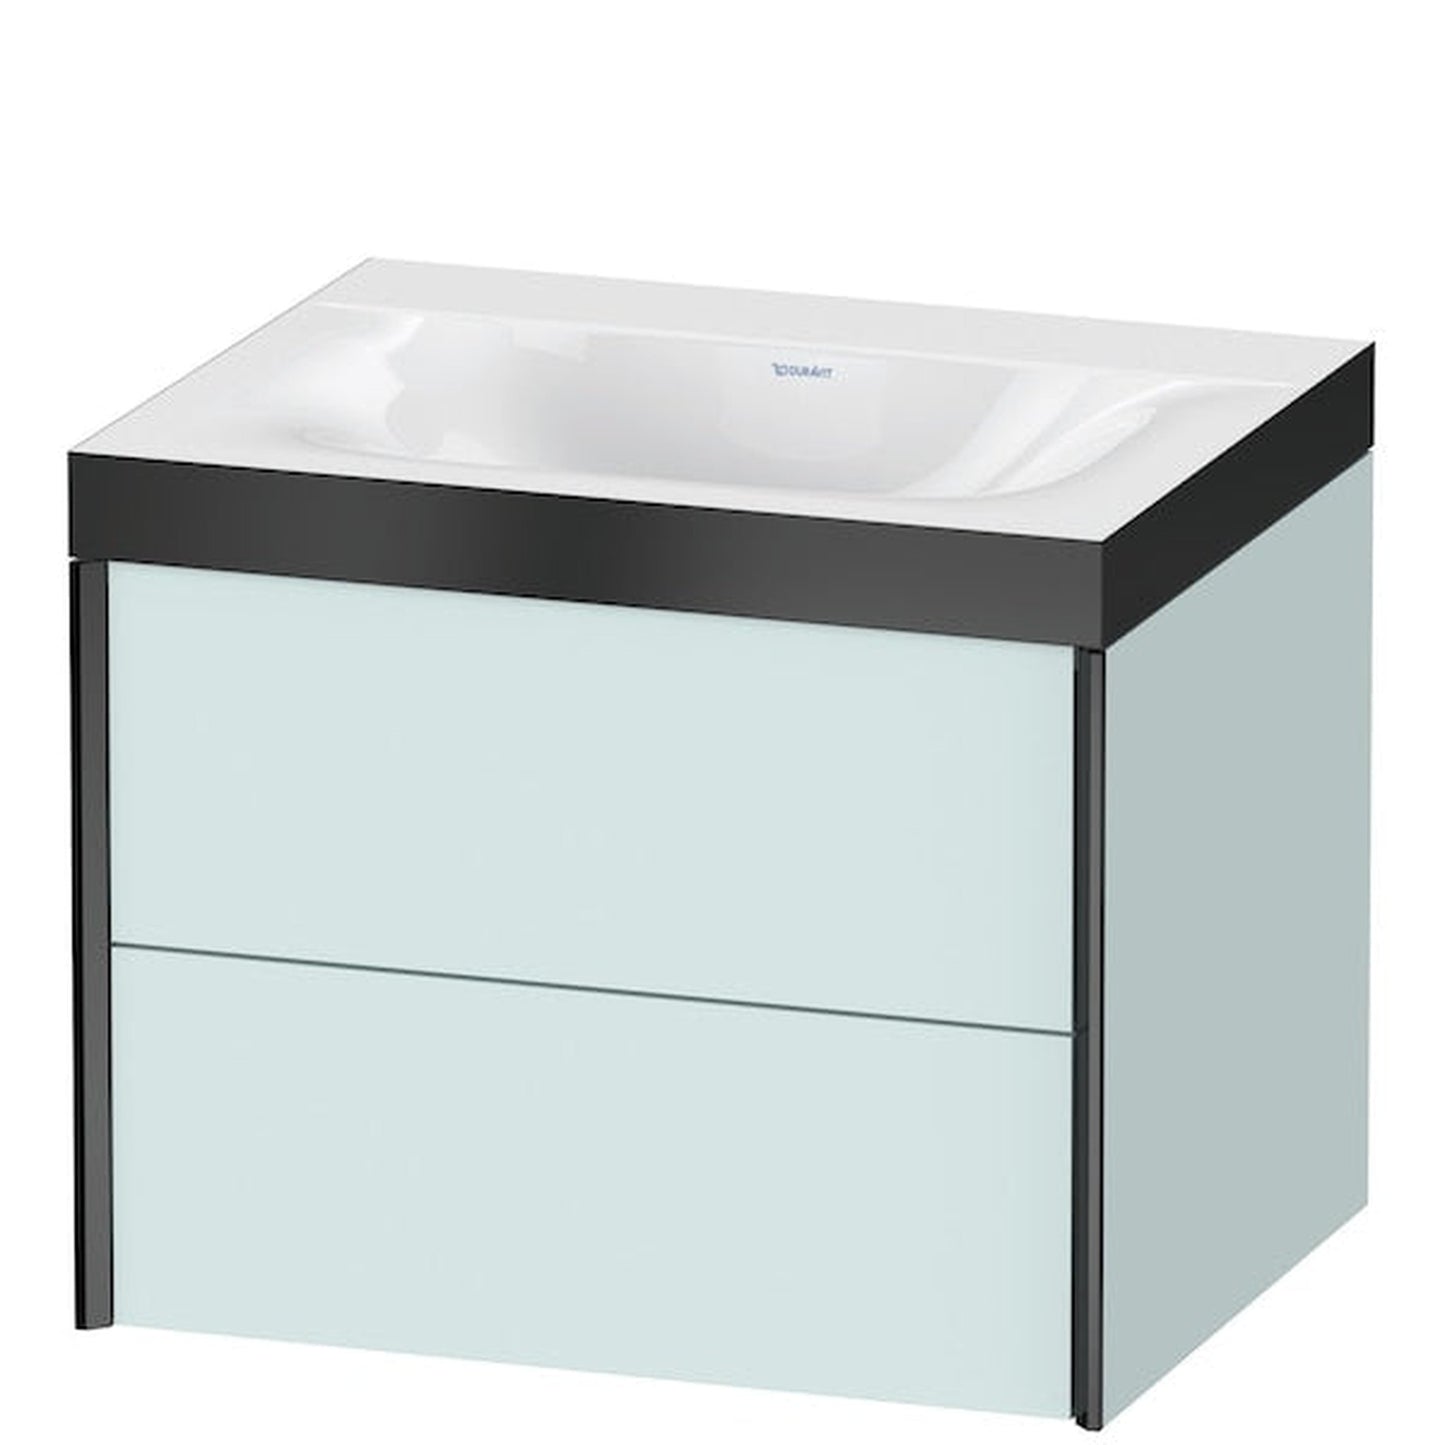 Duravit Xviu 24" x 20" x 19" Two Drawer C-Bonded Wall-Mount Vanity Kit Without Tap Hole, Light Blue (XV4614NB209P)